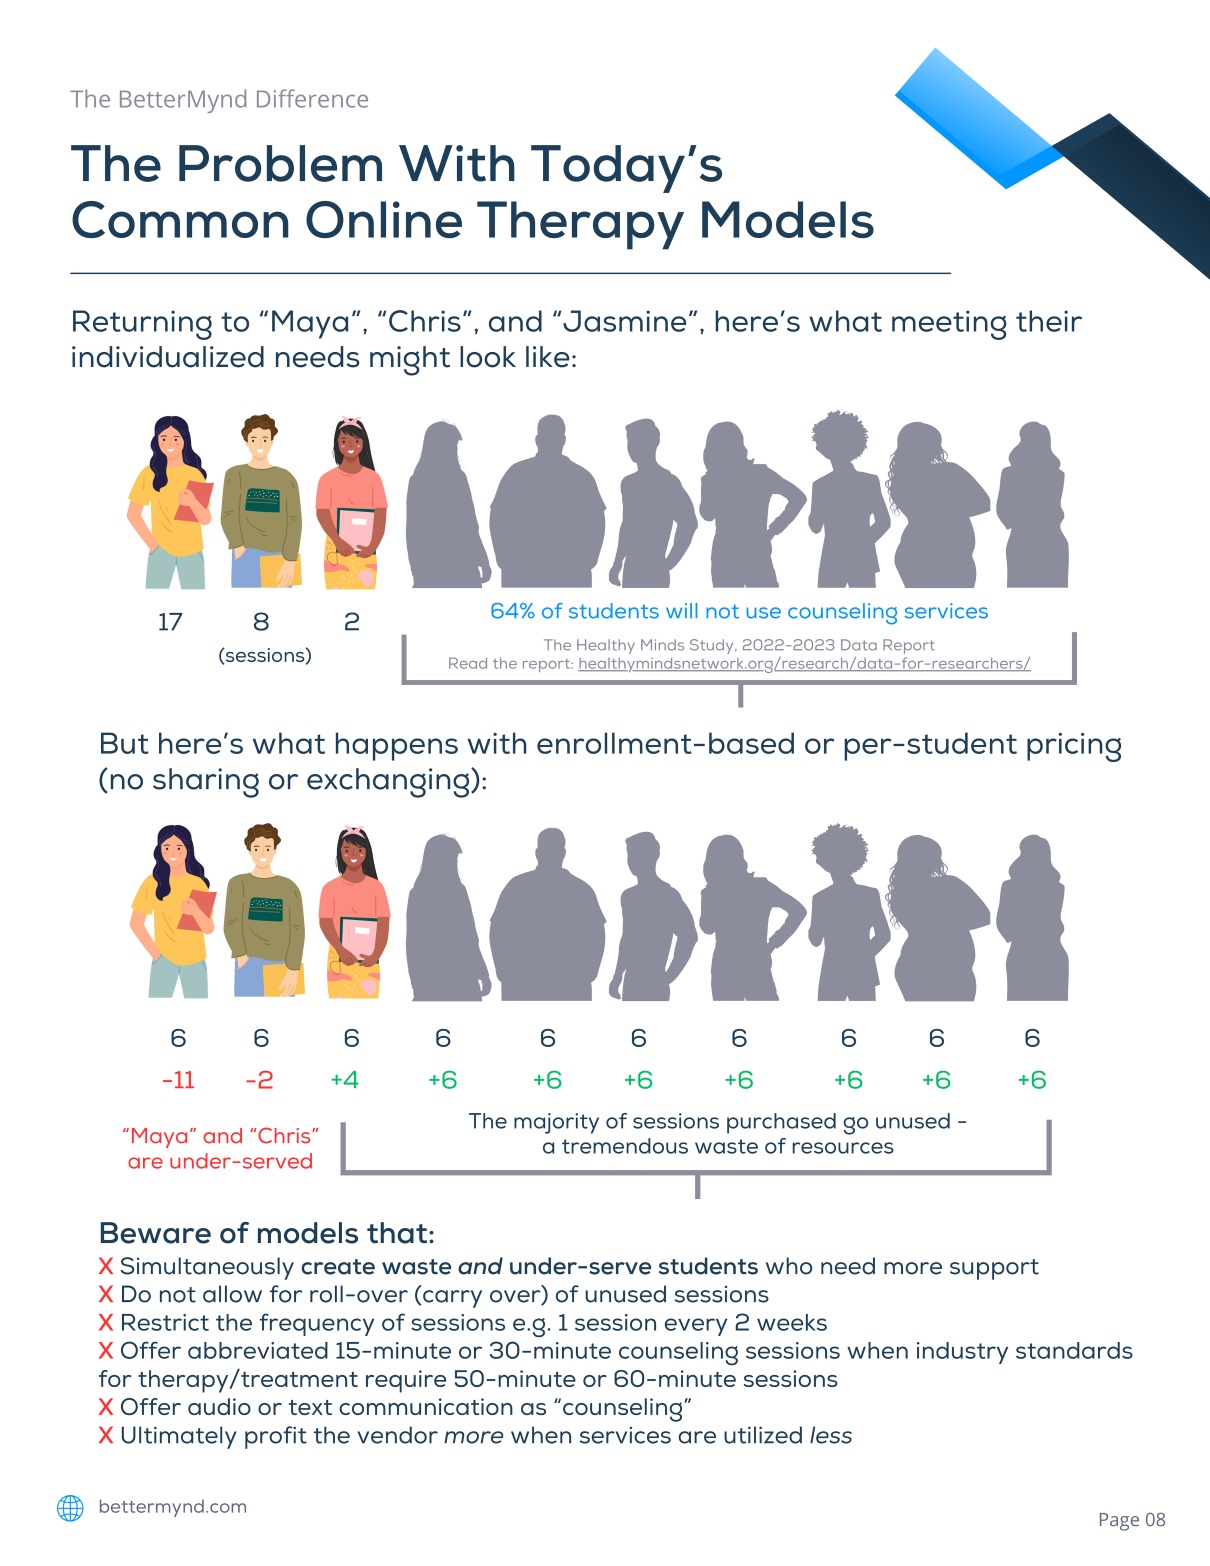 The problem with today's common online therapy models